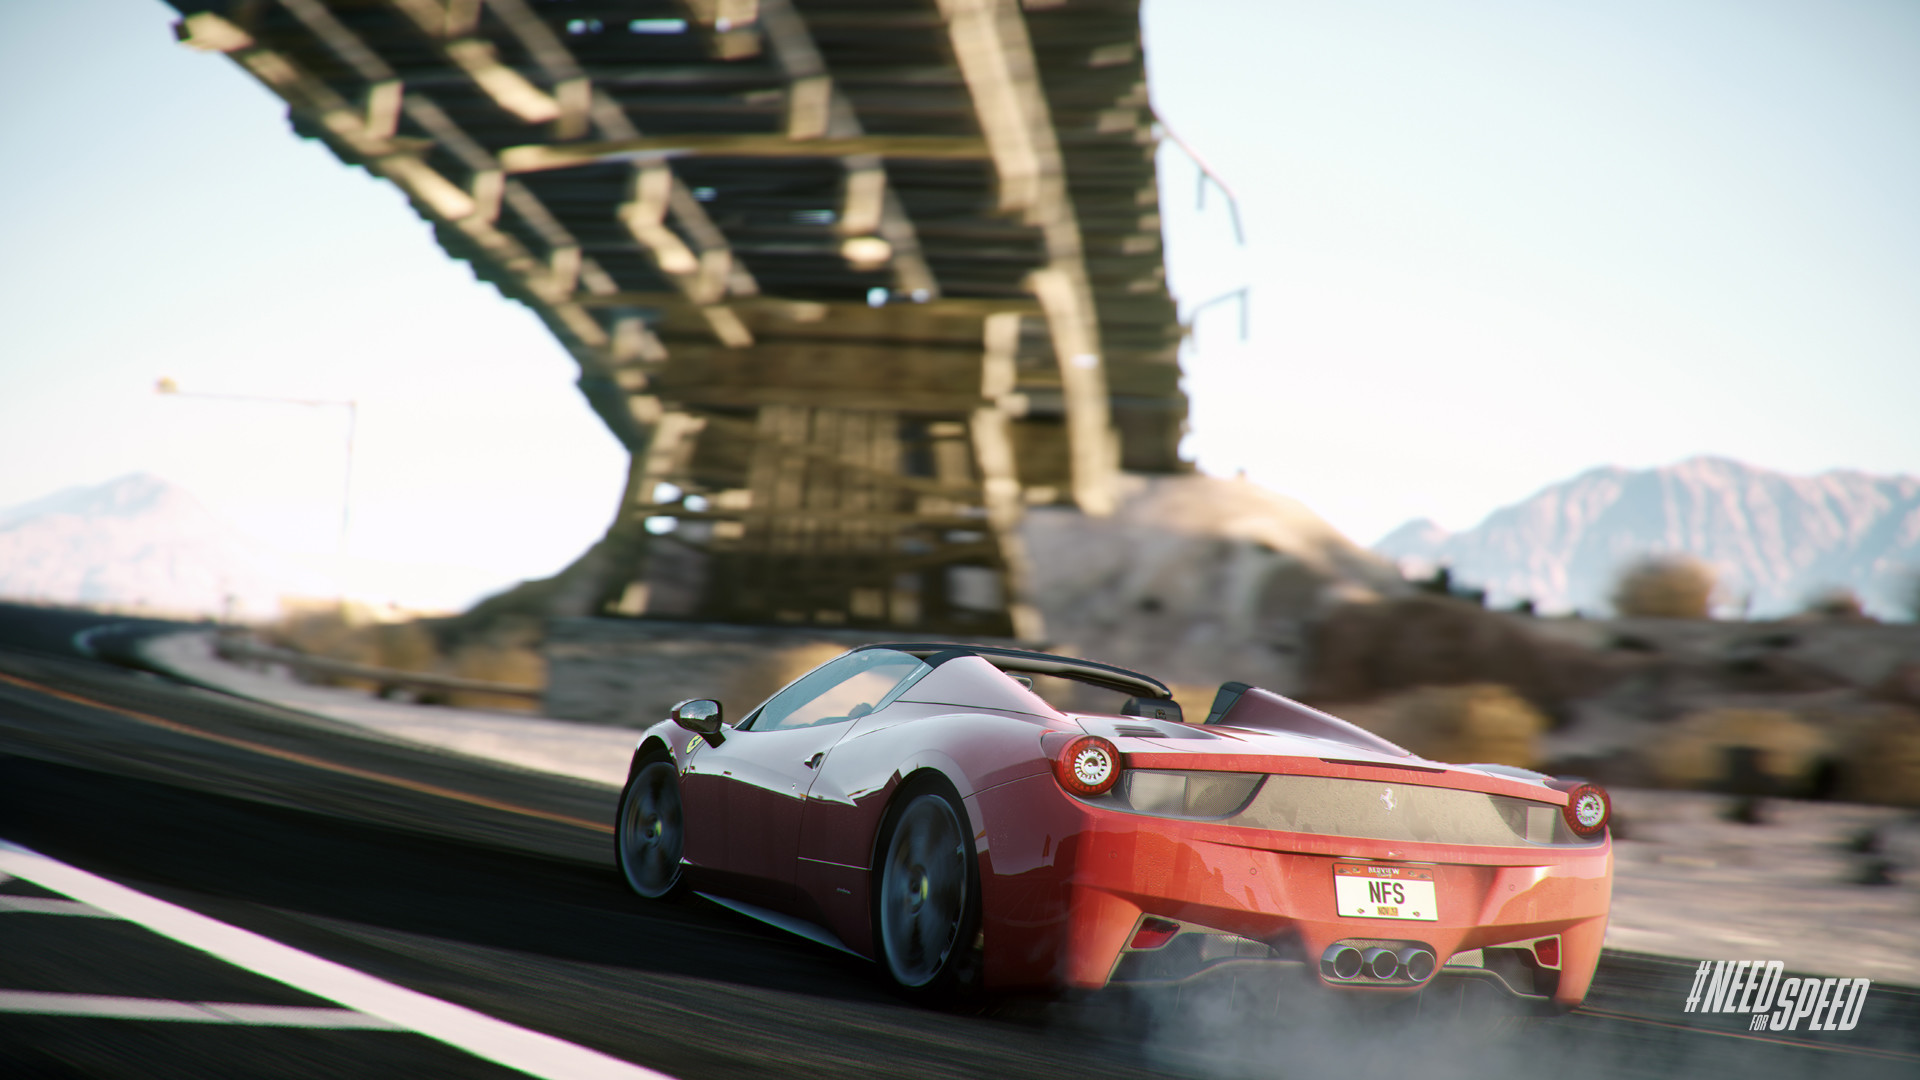 Need For Speed Rivals - Ragnar Games